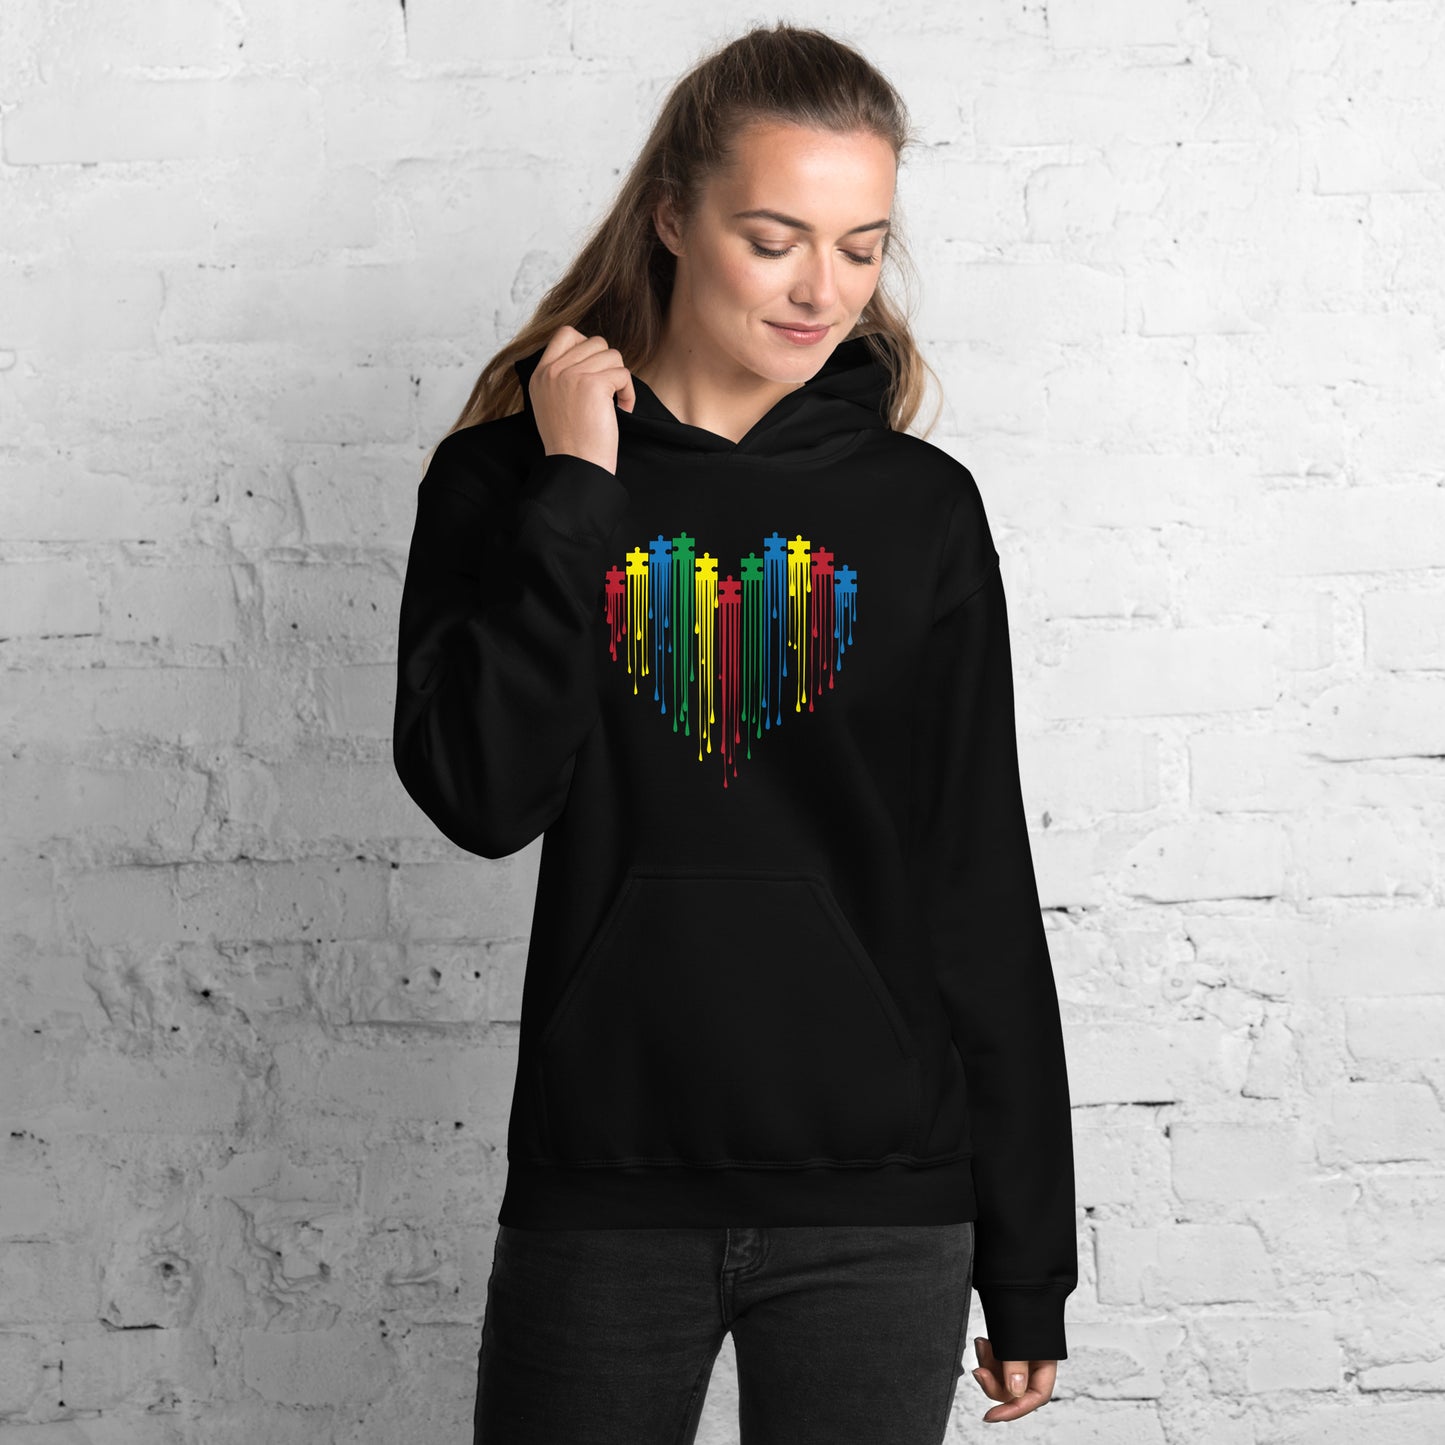 Painted Heart for Autism Hoodie